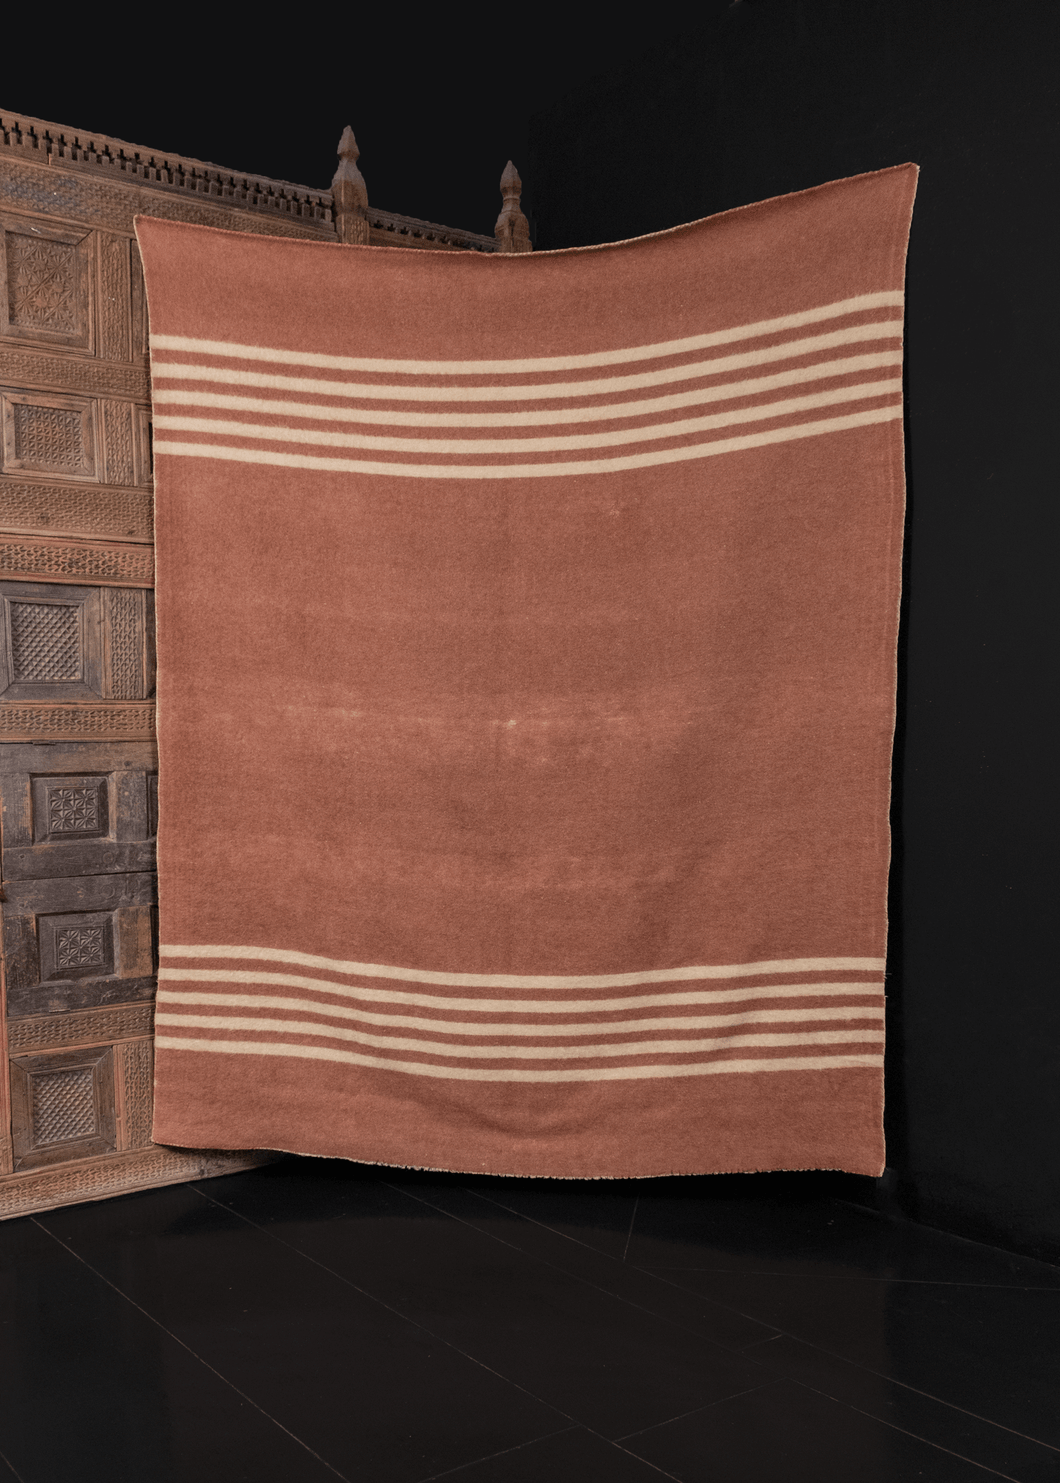 Early 20th century camping blanket in brown and camel. In good condition, signs of wear consistent with age. 100% Wool